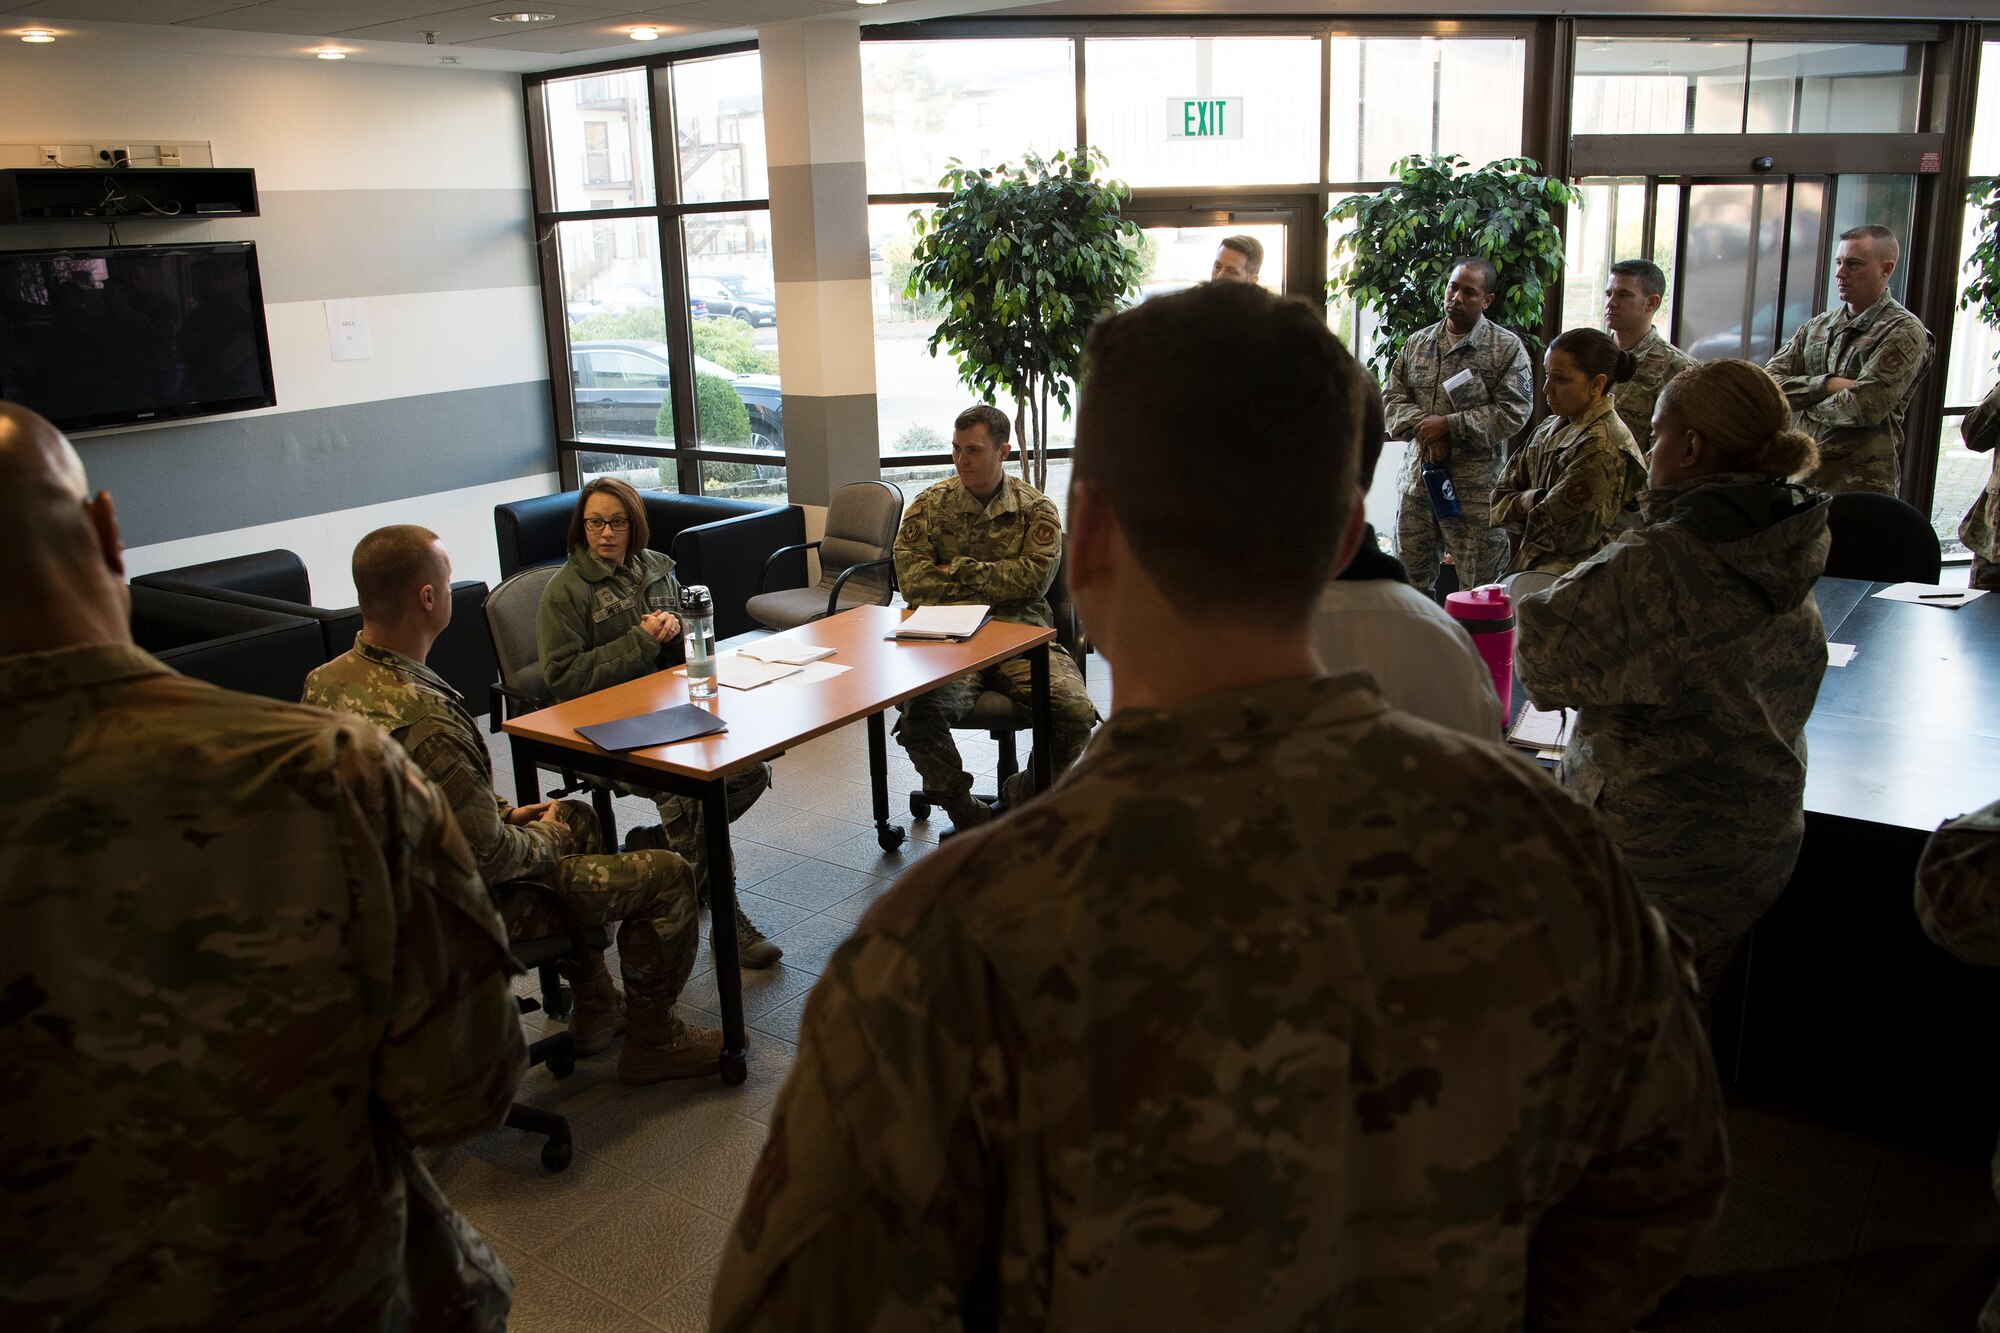 U.S. Air Force Senior Master Sgt. Shiloh Smith, 86th Logistics Readiness Squadron first sergeant, center, practices dispute resolution techniques during the Negotiation and Dispute Resolution Course held at the U.S. Air Forces in Europe and Air Forces Africa Conference Center, Ramstein Air Base, Germany, Dec. 4, 2019.